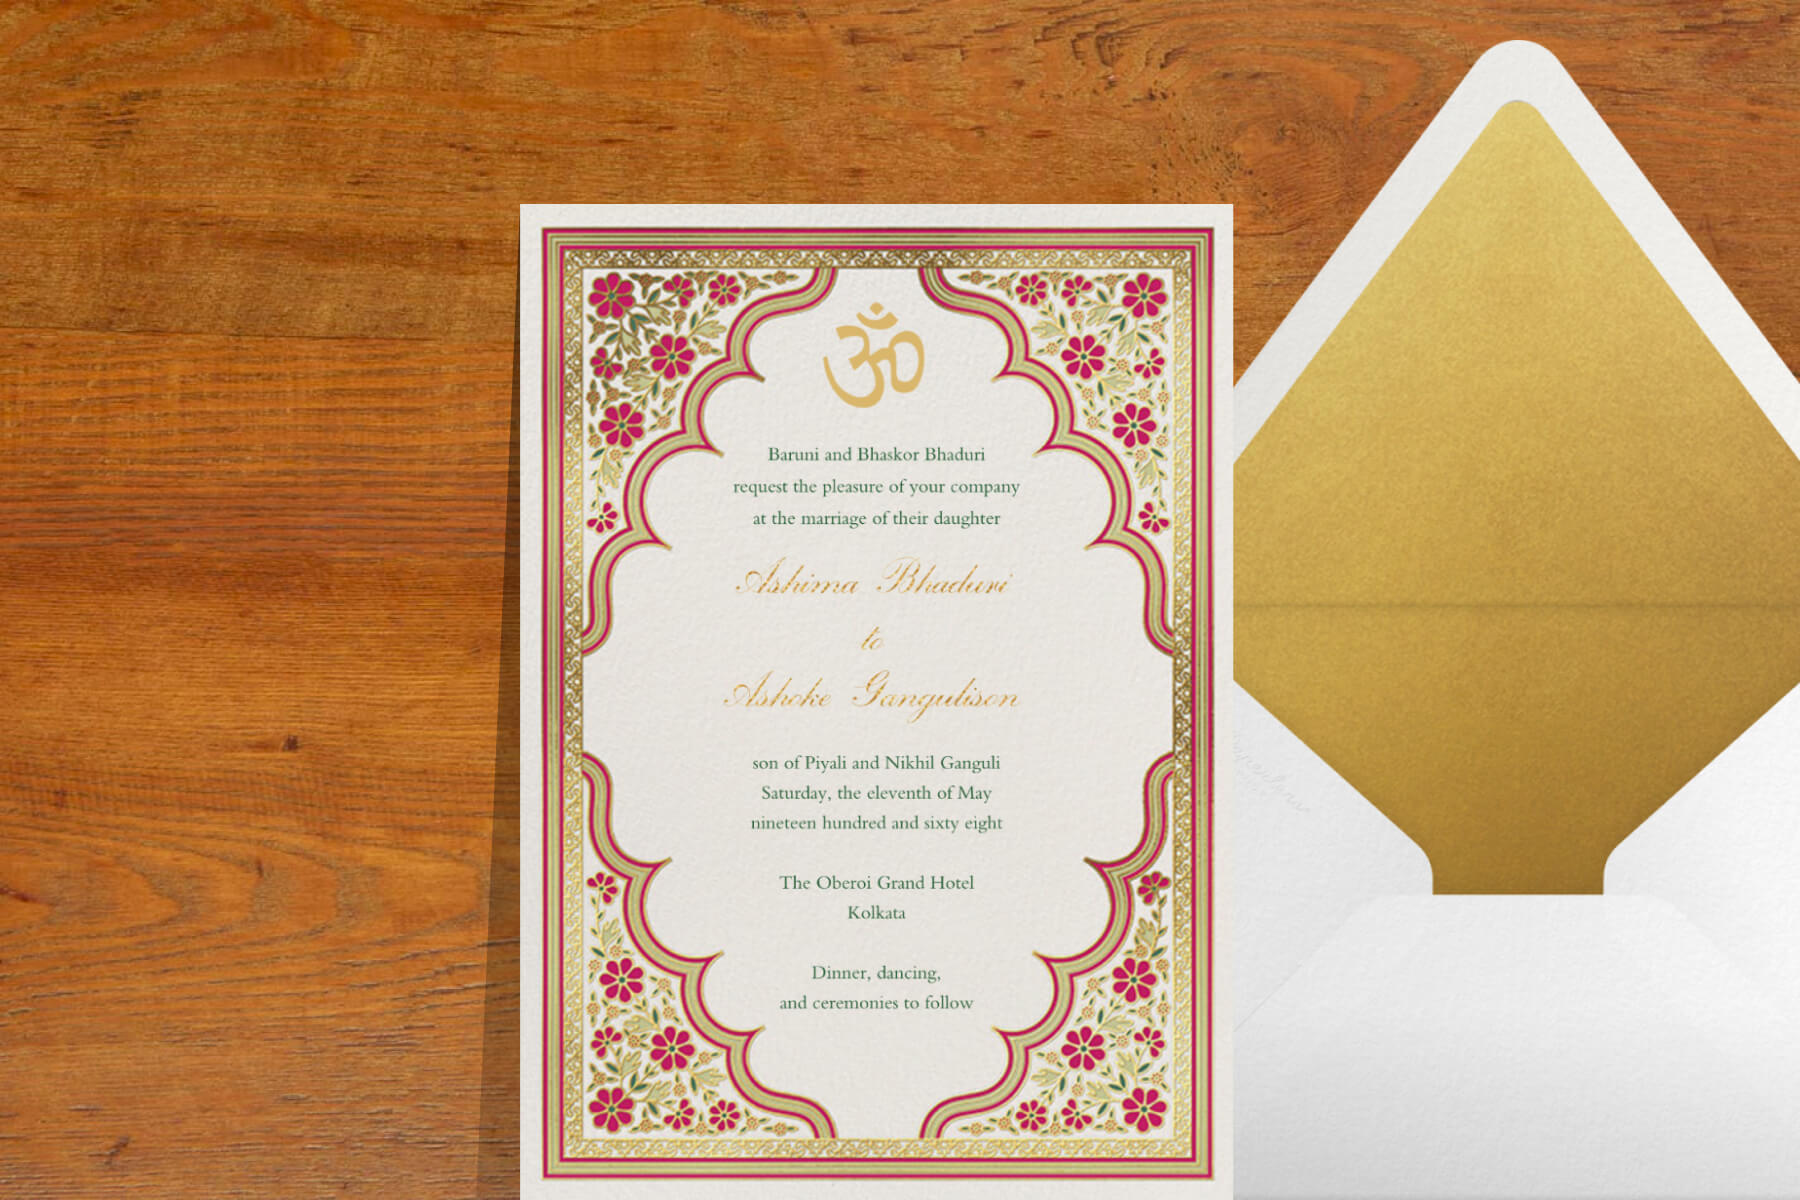 An Indian wedding invitation featuring Indian art motifs like flowers and ornate borders. The card is paired with a white envelope with a gold lining.